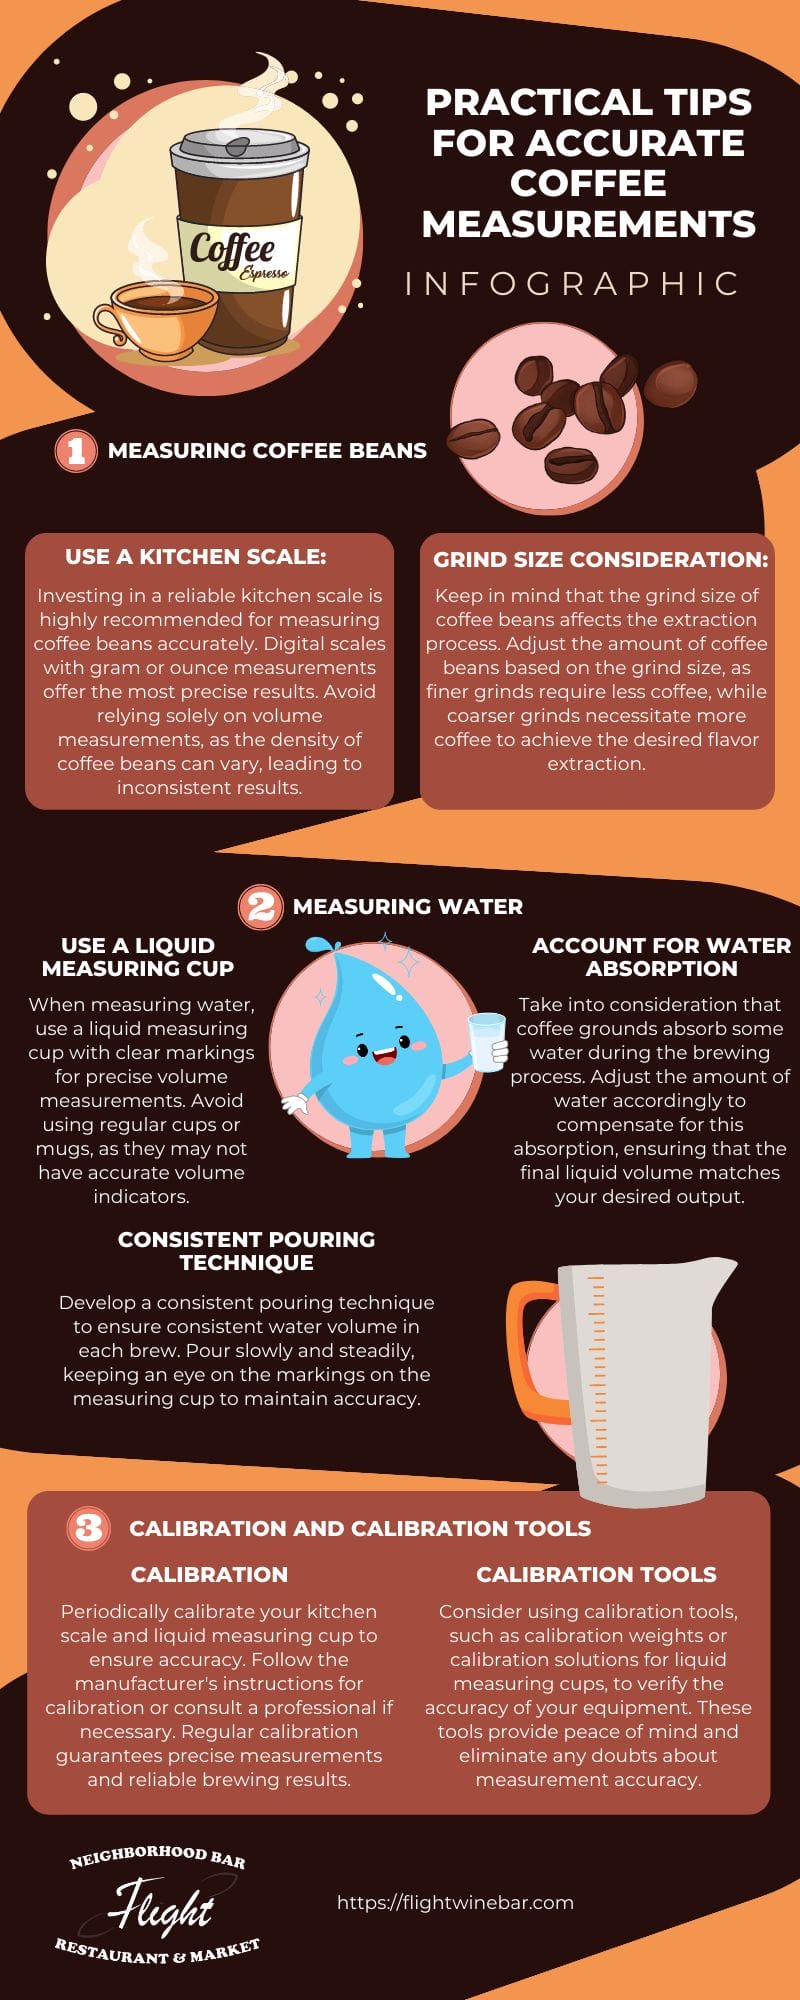 Practical Tips for Accurate Coffee Measurements infographic